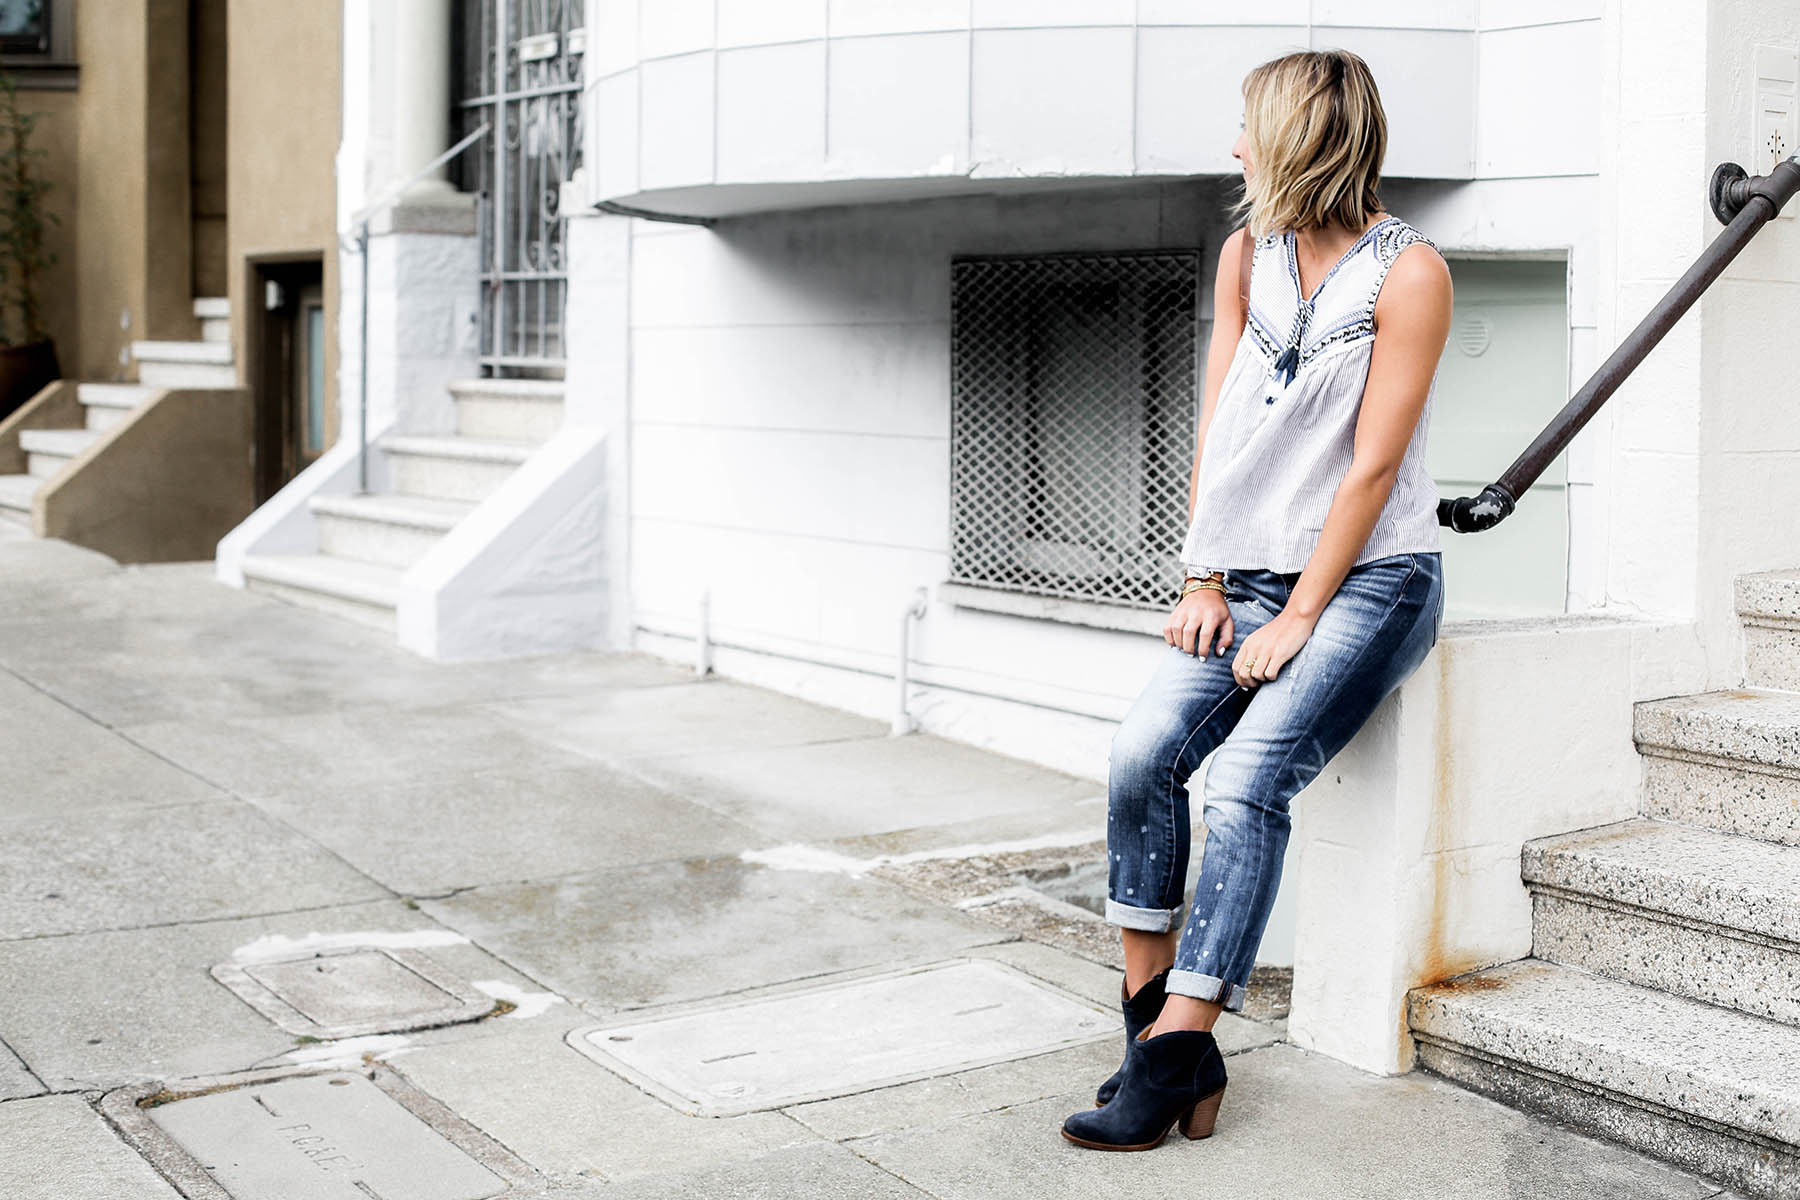 fall fashion trends patchwork denim boyfriend jeans and blue suede ankle boots